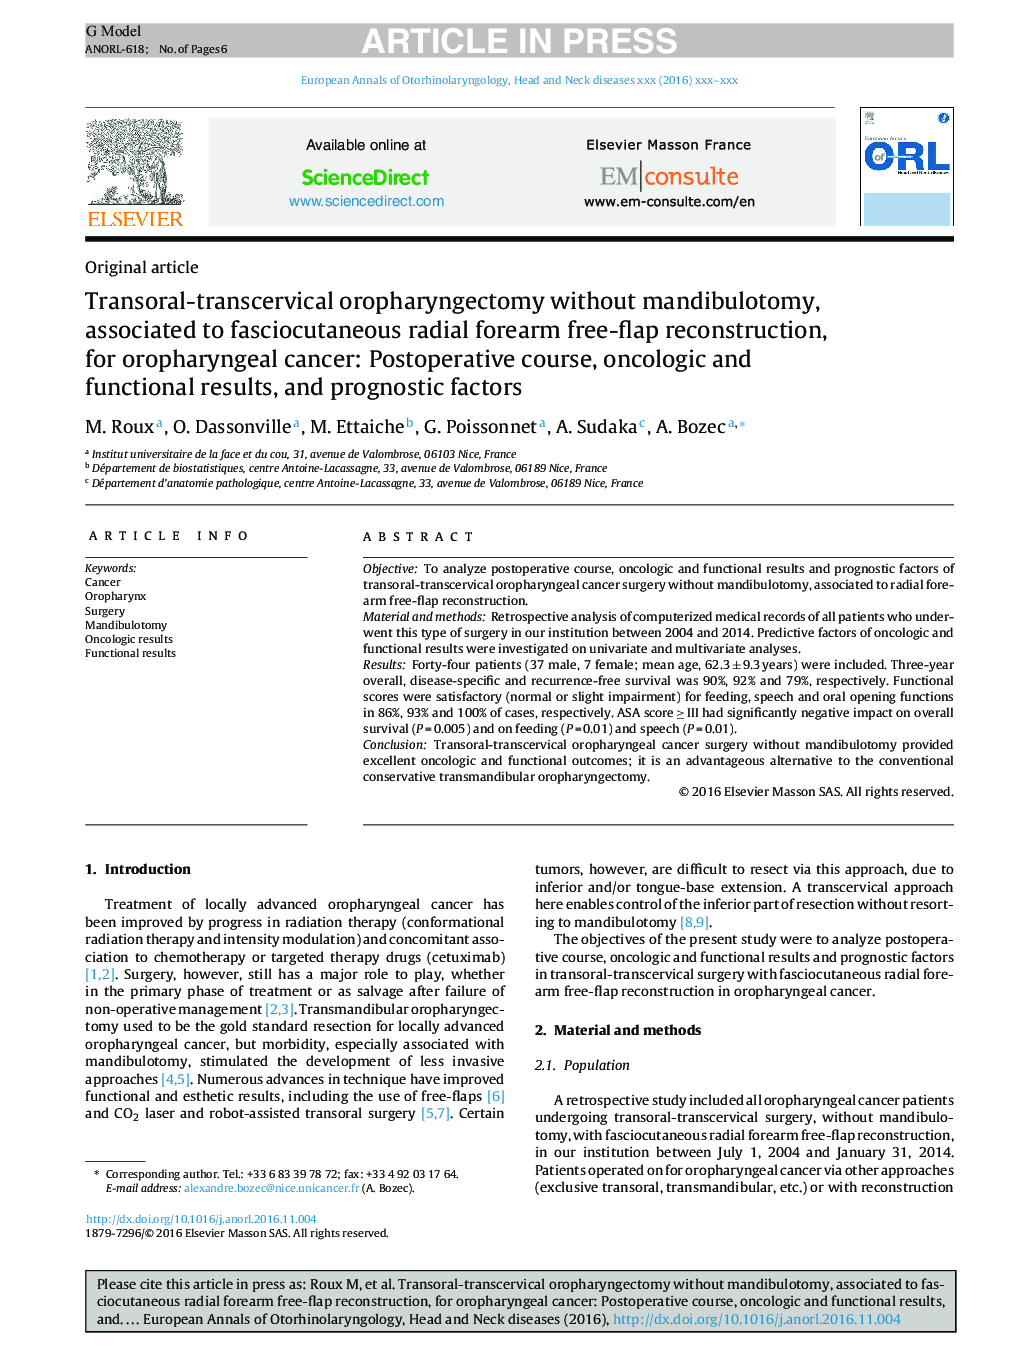 Transoral-transcervical oropharyngectomy without mandibulotomy, associated to fasciocutaneous radial forearm free-flap reconstruction, for oropharyngeal cancer: Postoperative course, oncologic and functional results, and prognostic factors